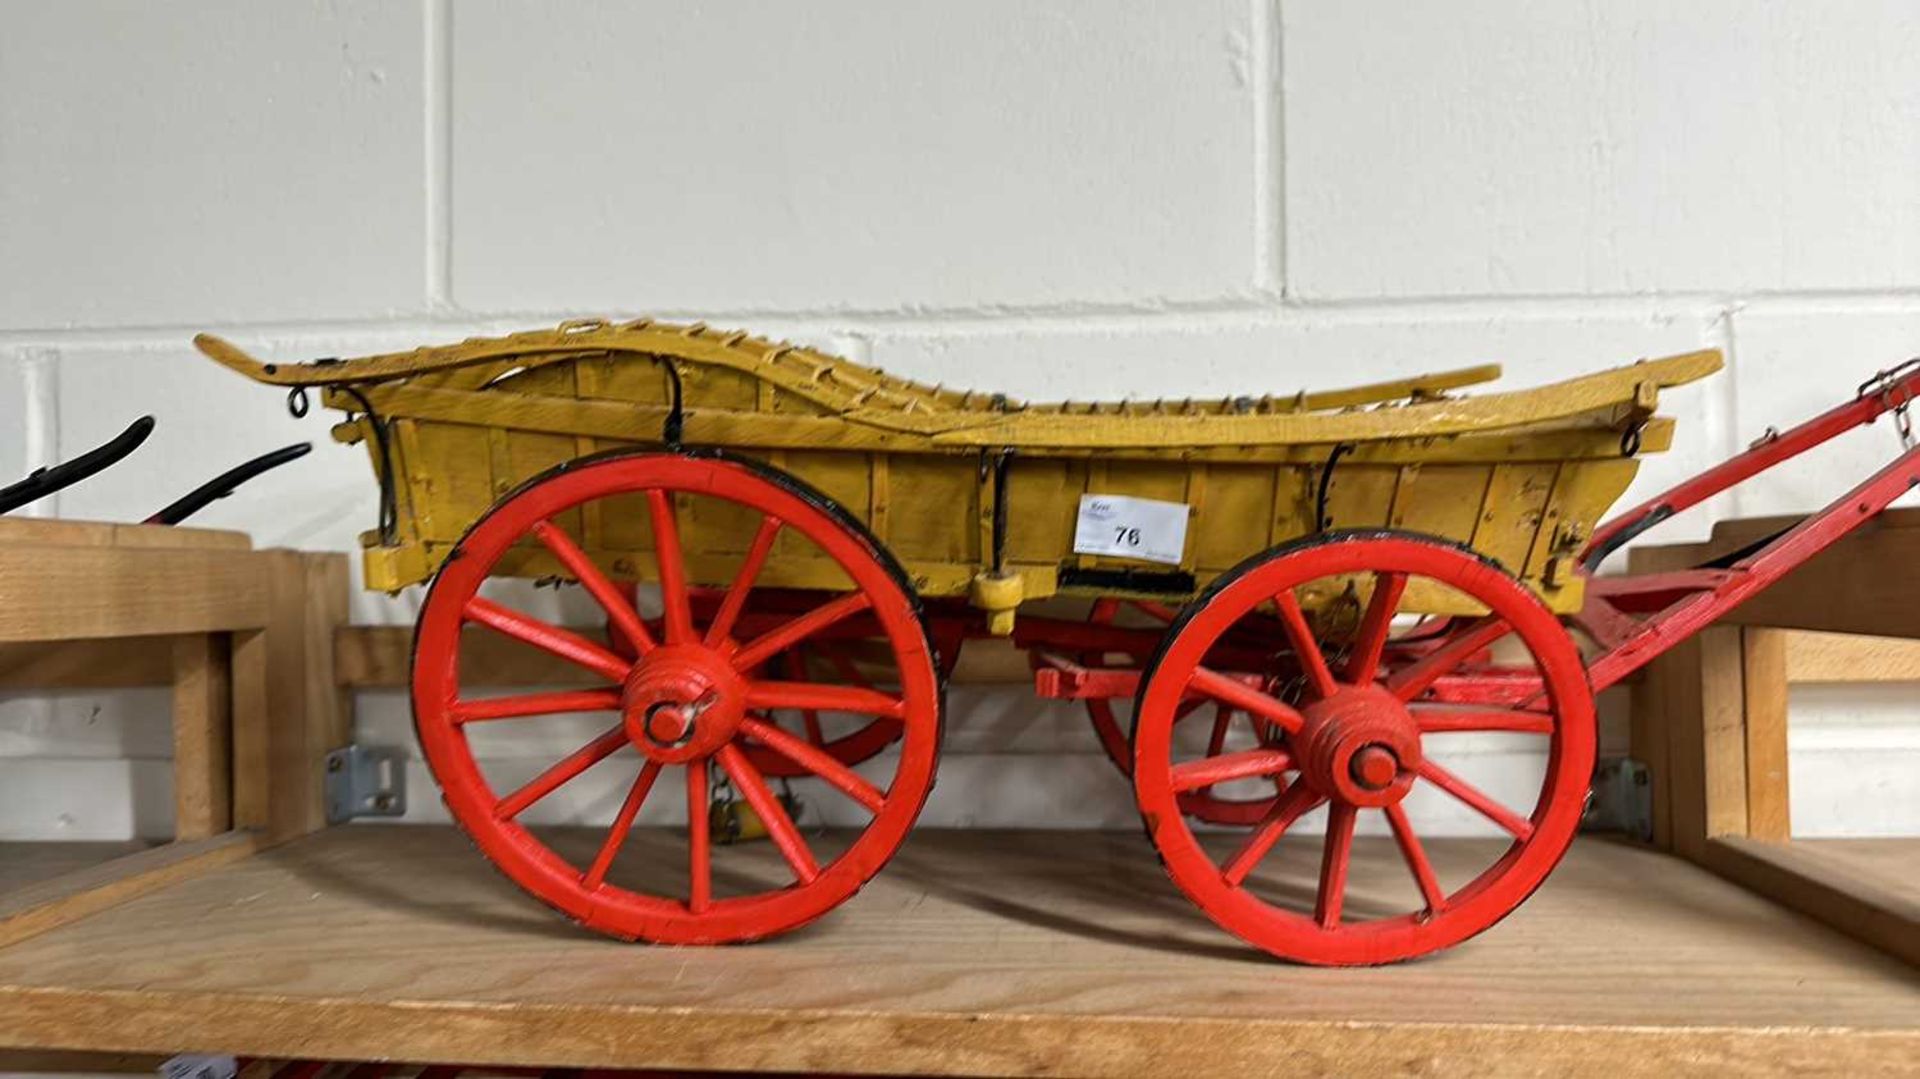 A scratch built model of an Oxford Wagon, painted in beige and red, approx 80cm long in total - Image 3 of 6